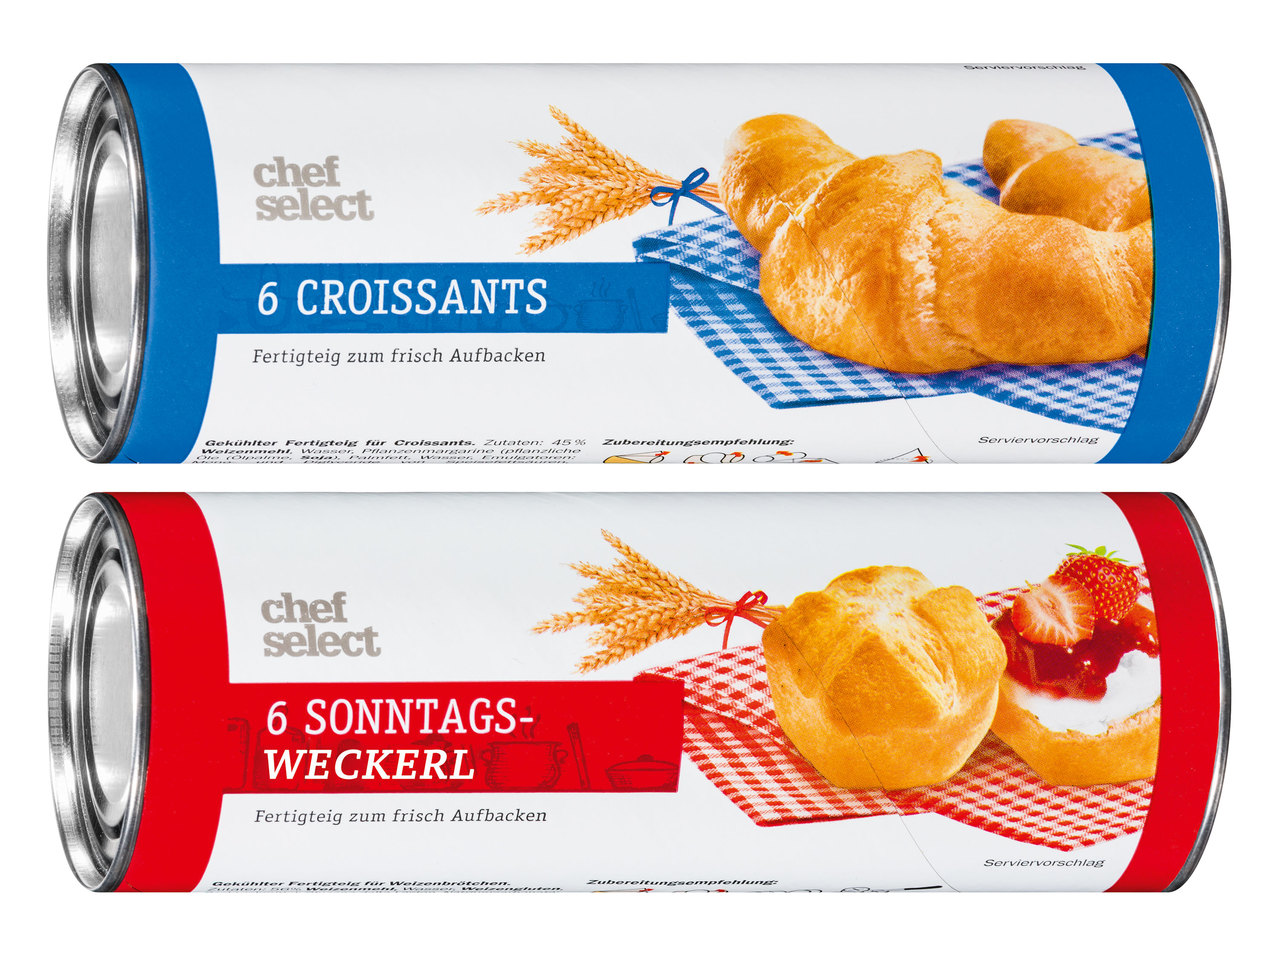 CHEF SELECT Croissants/Sonntagsweckerl